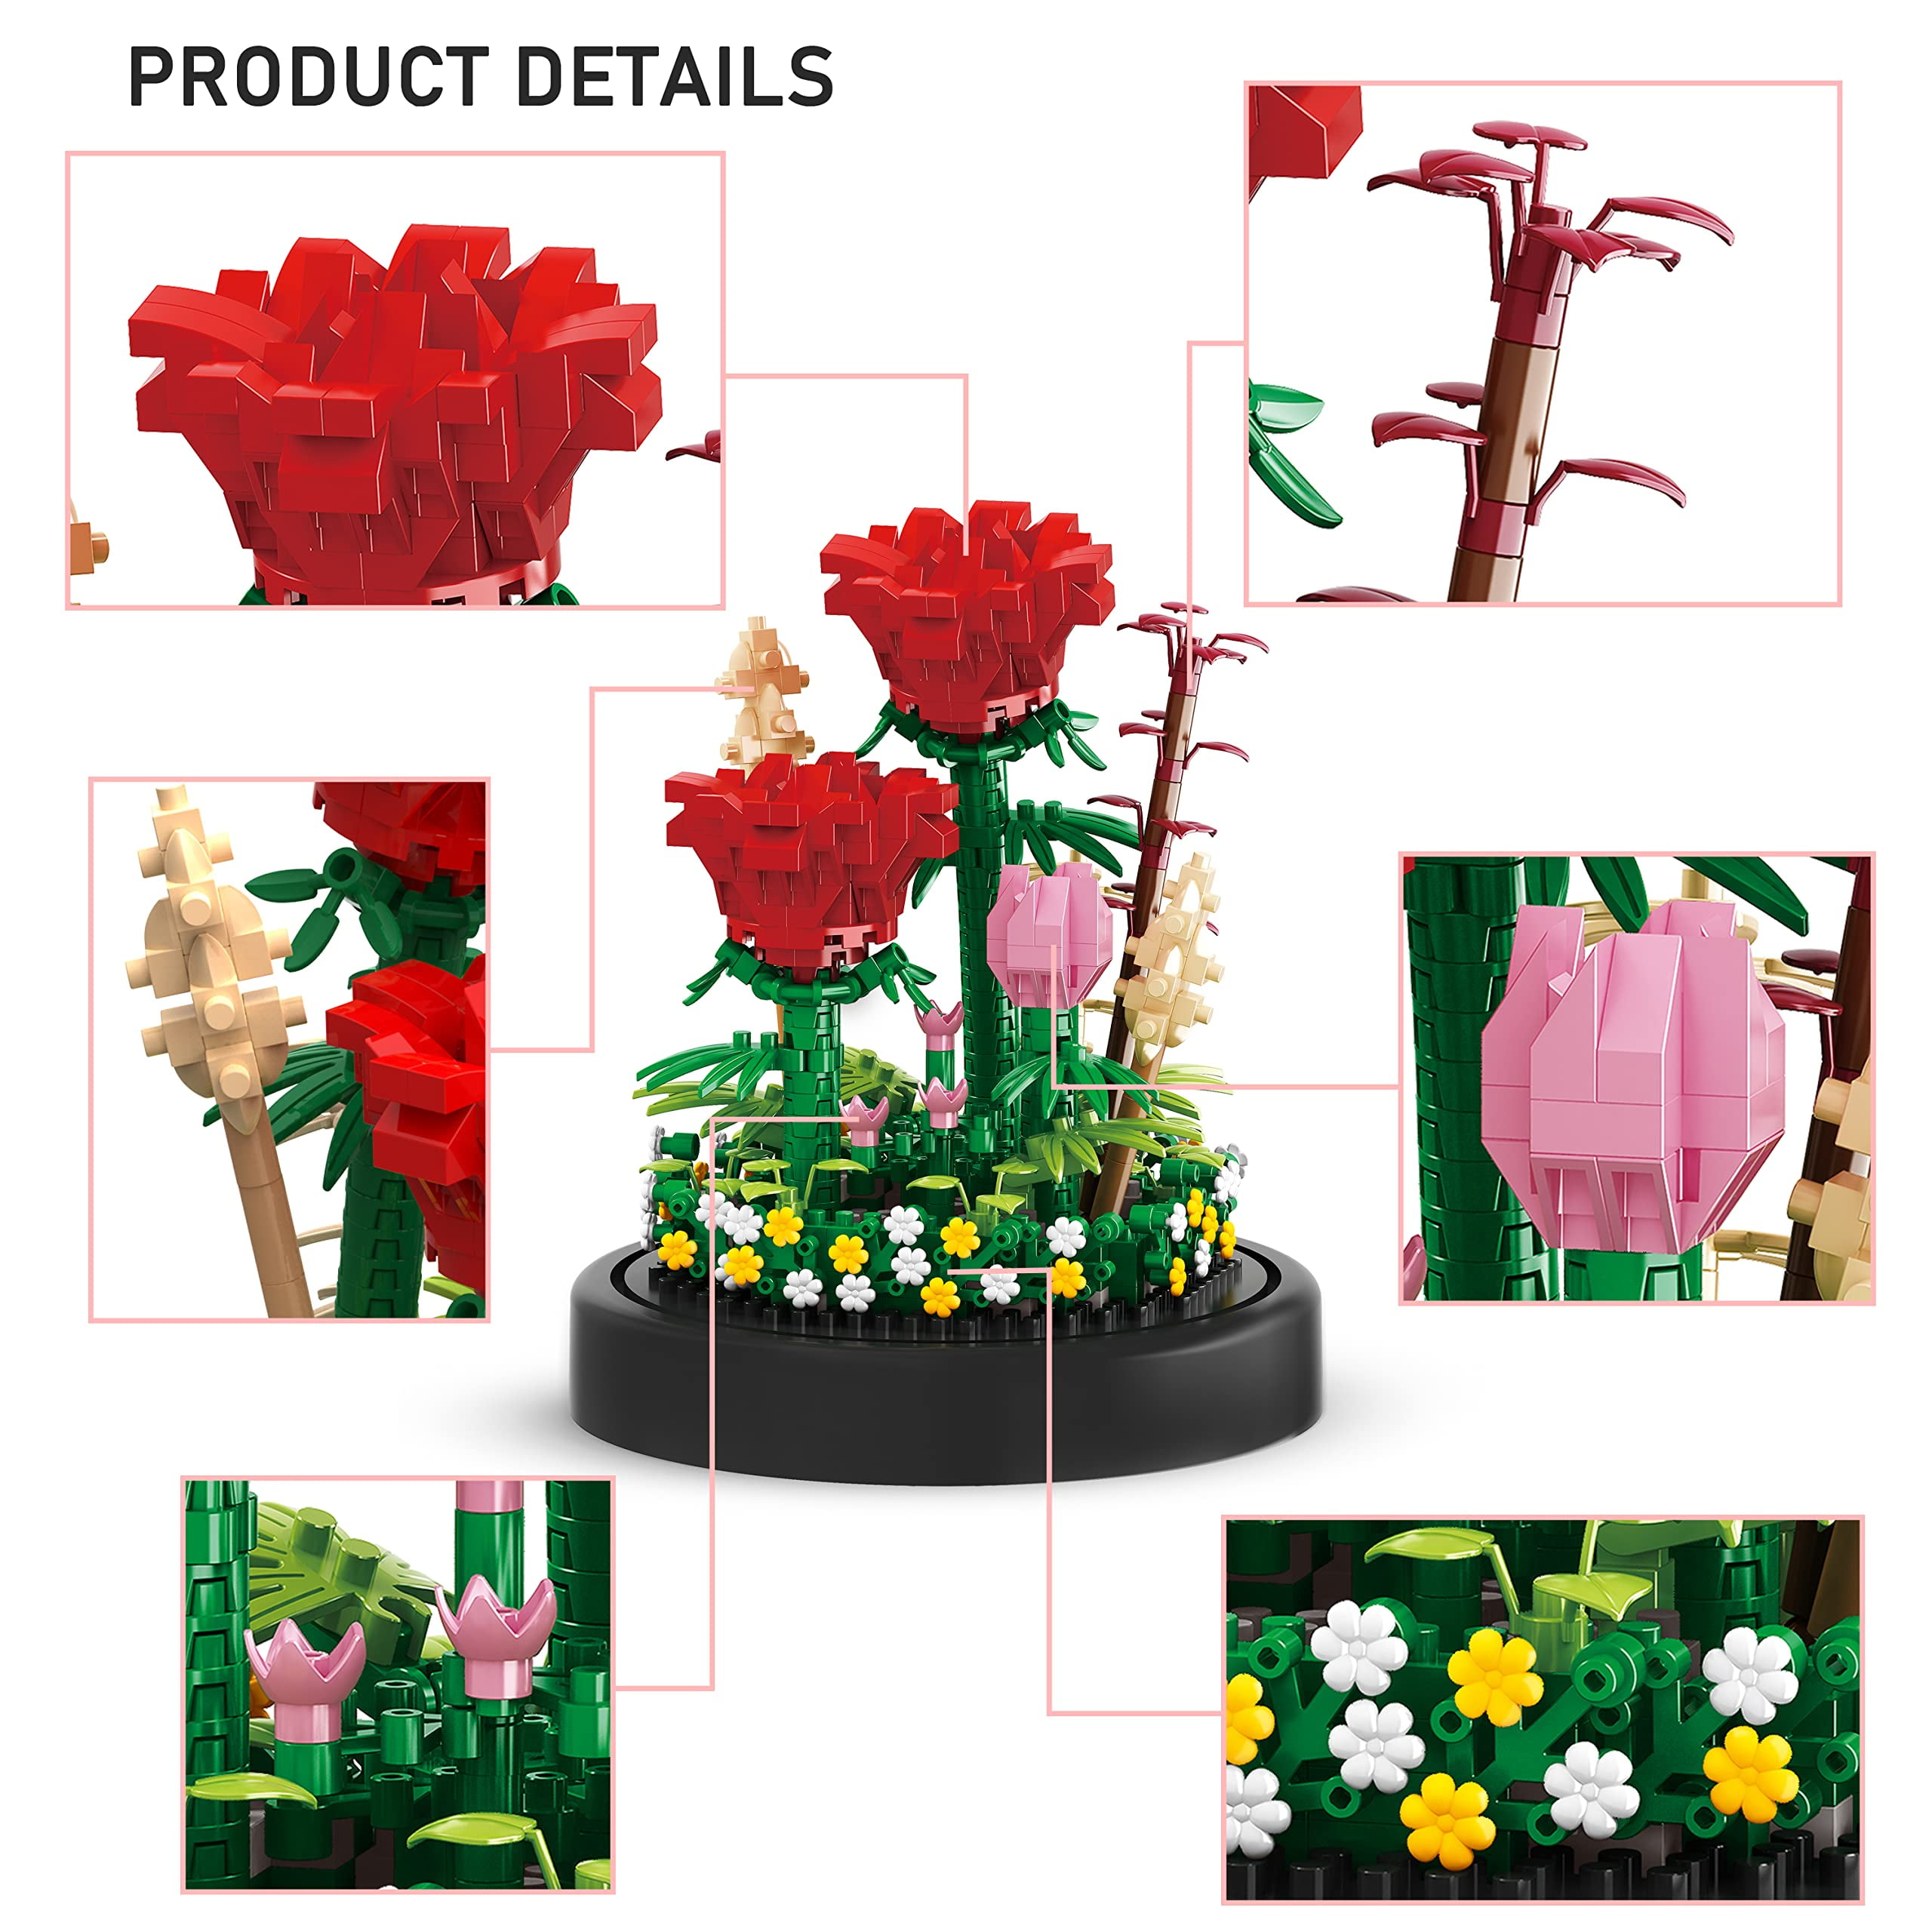 Flower Bouquet Building Kit, 524 Pcs Mini Bricks Building Blocks Sets,  Forever Rose Decorated Flower with Dust Cover, Valentine's Day Gifts for  Her